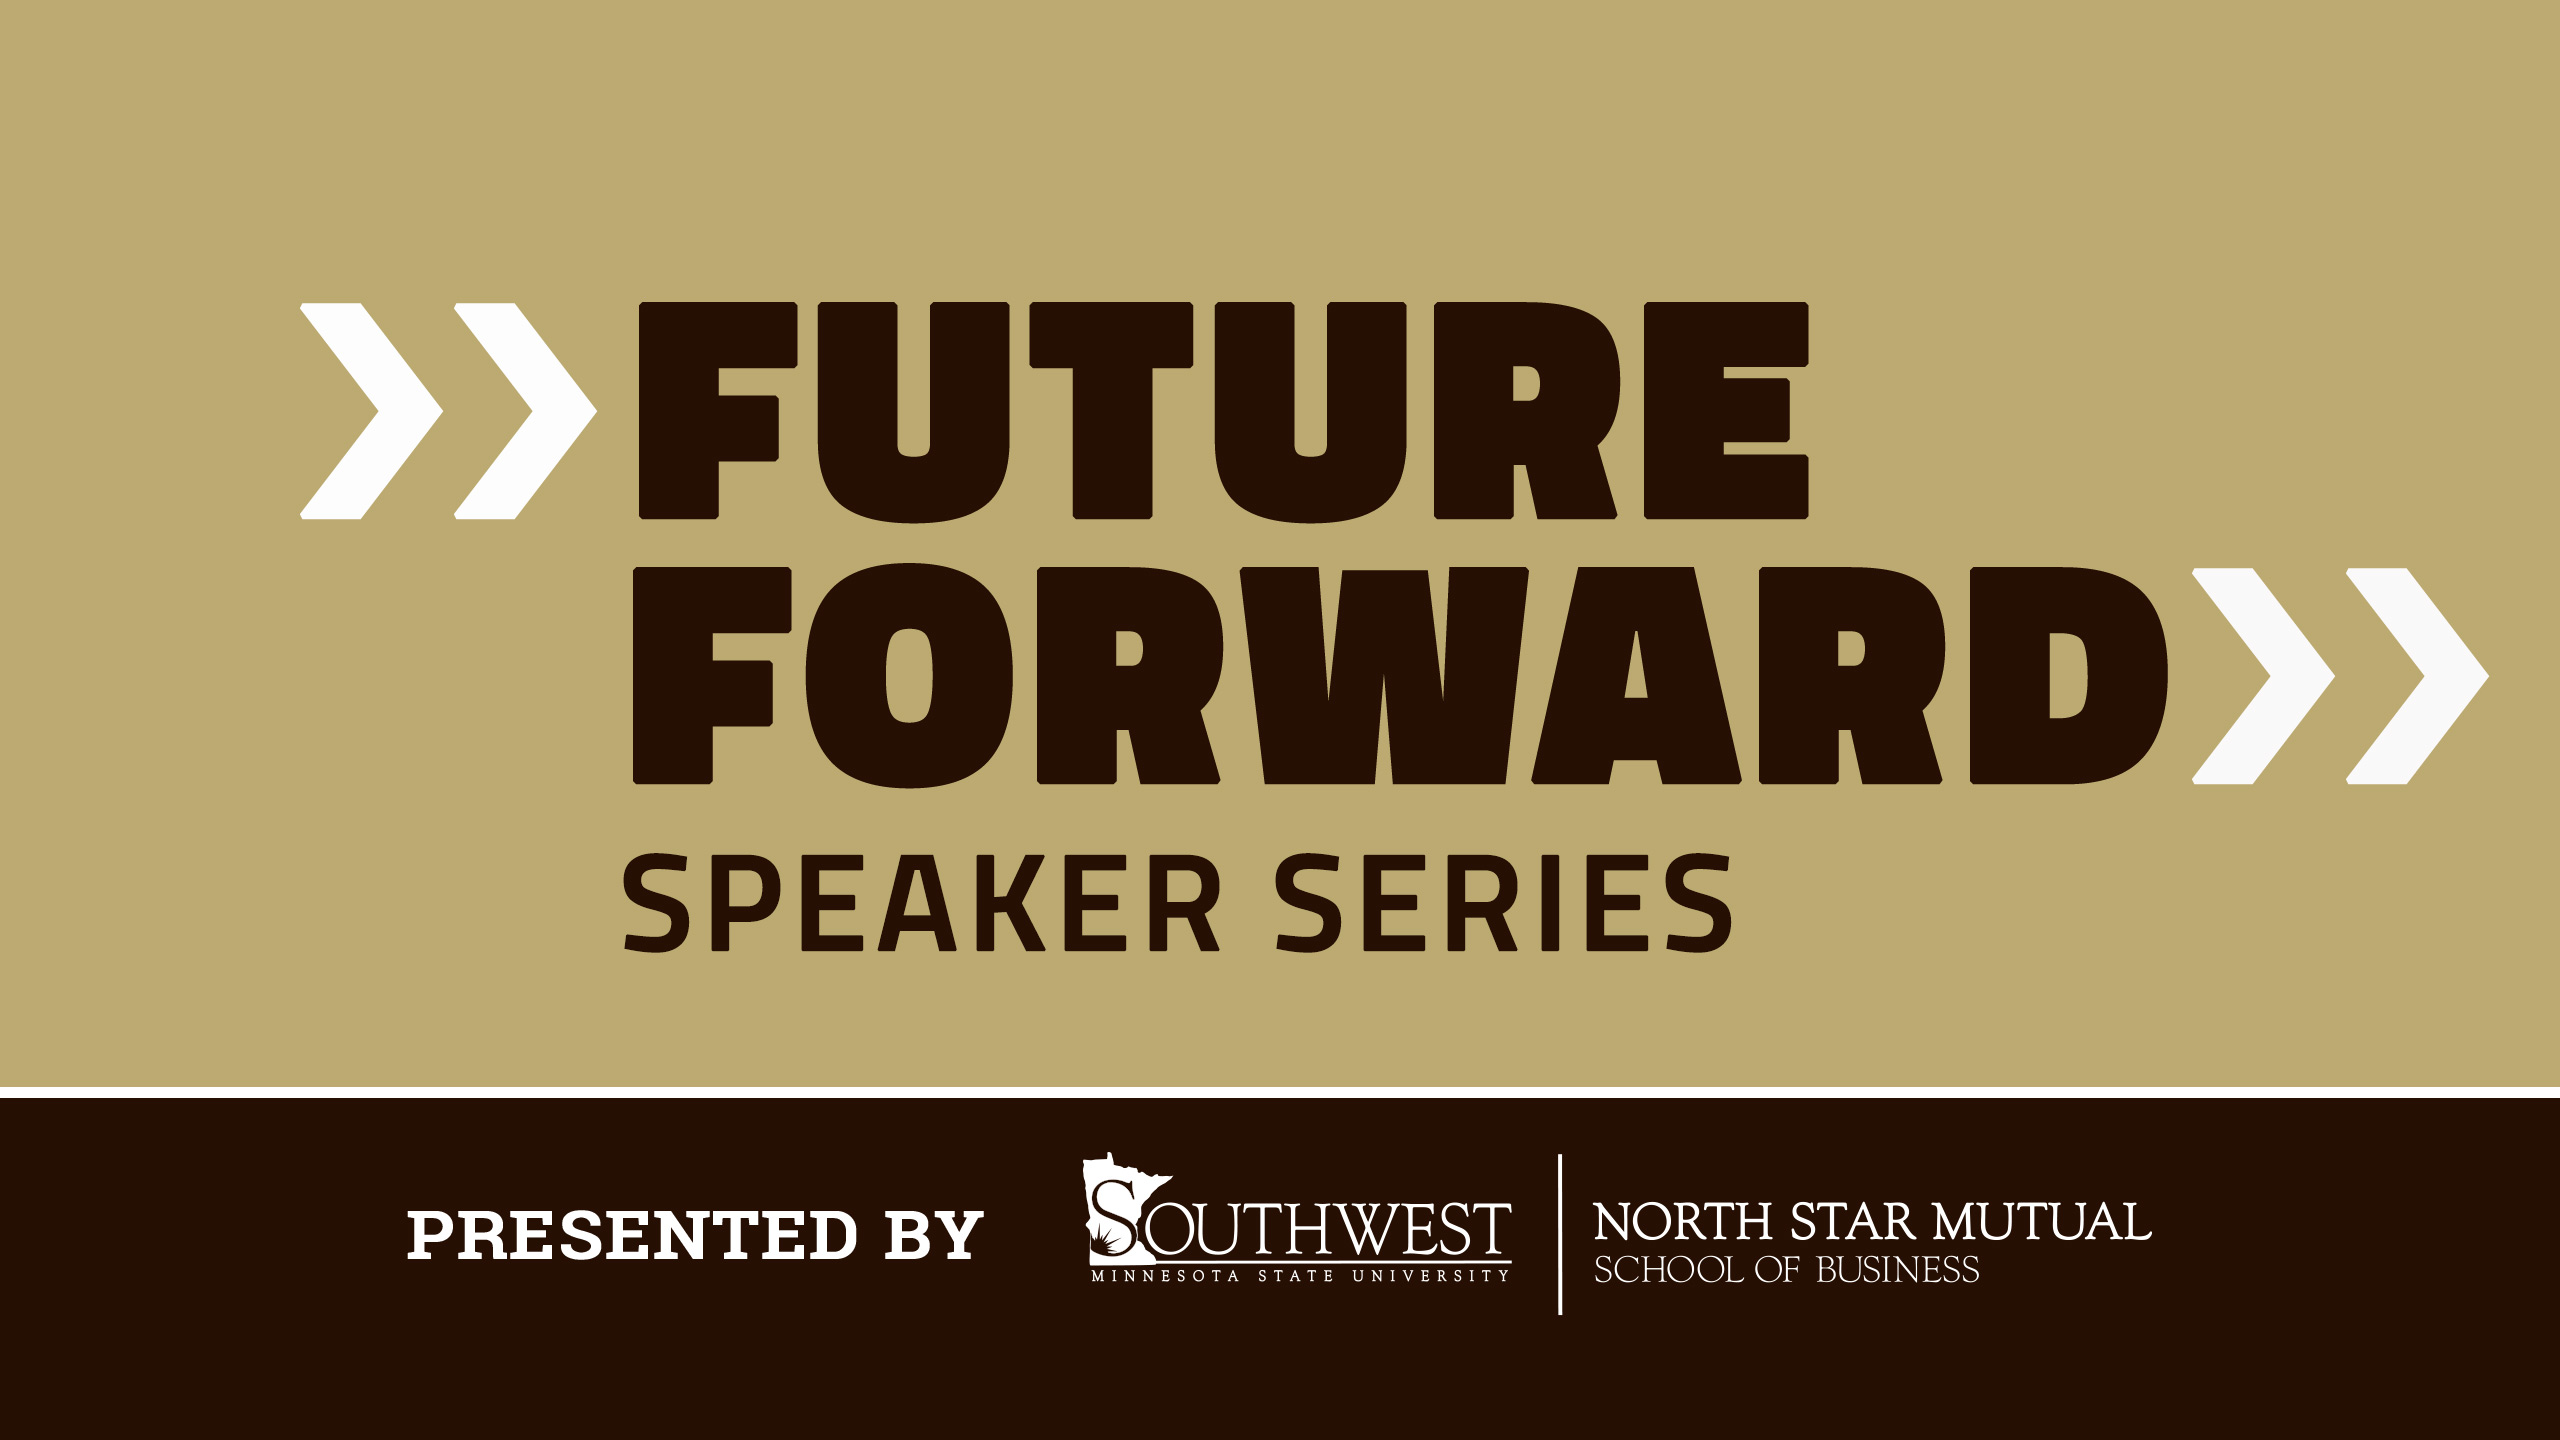 Photo: First of "Future Forward" Speaker Series Set for April 15